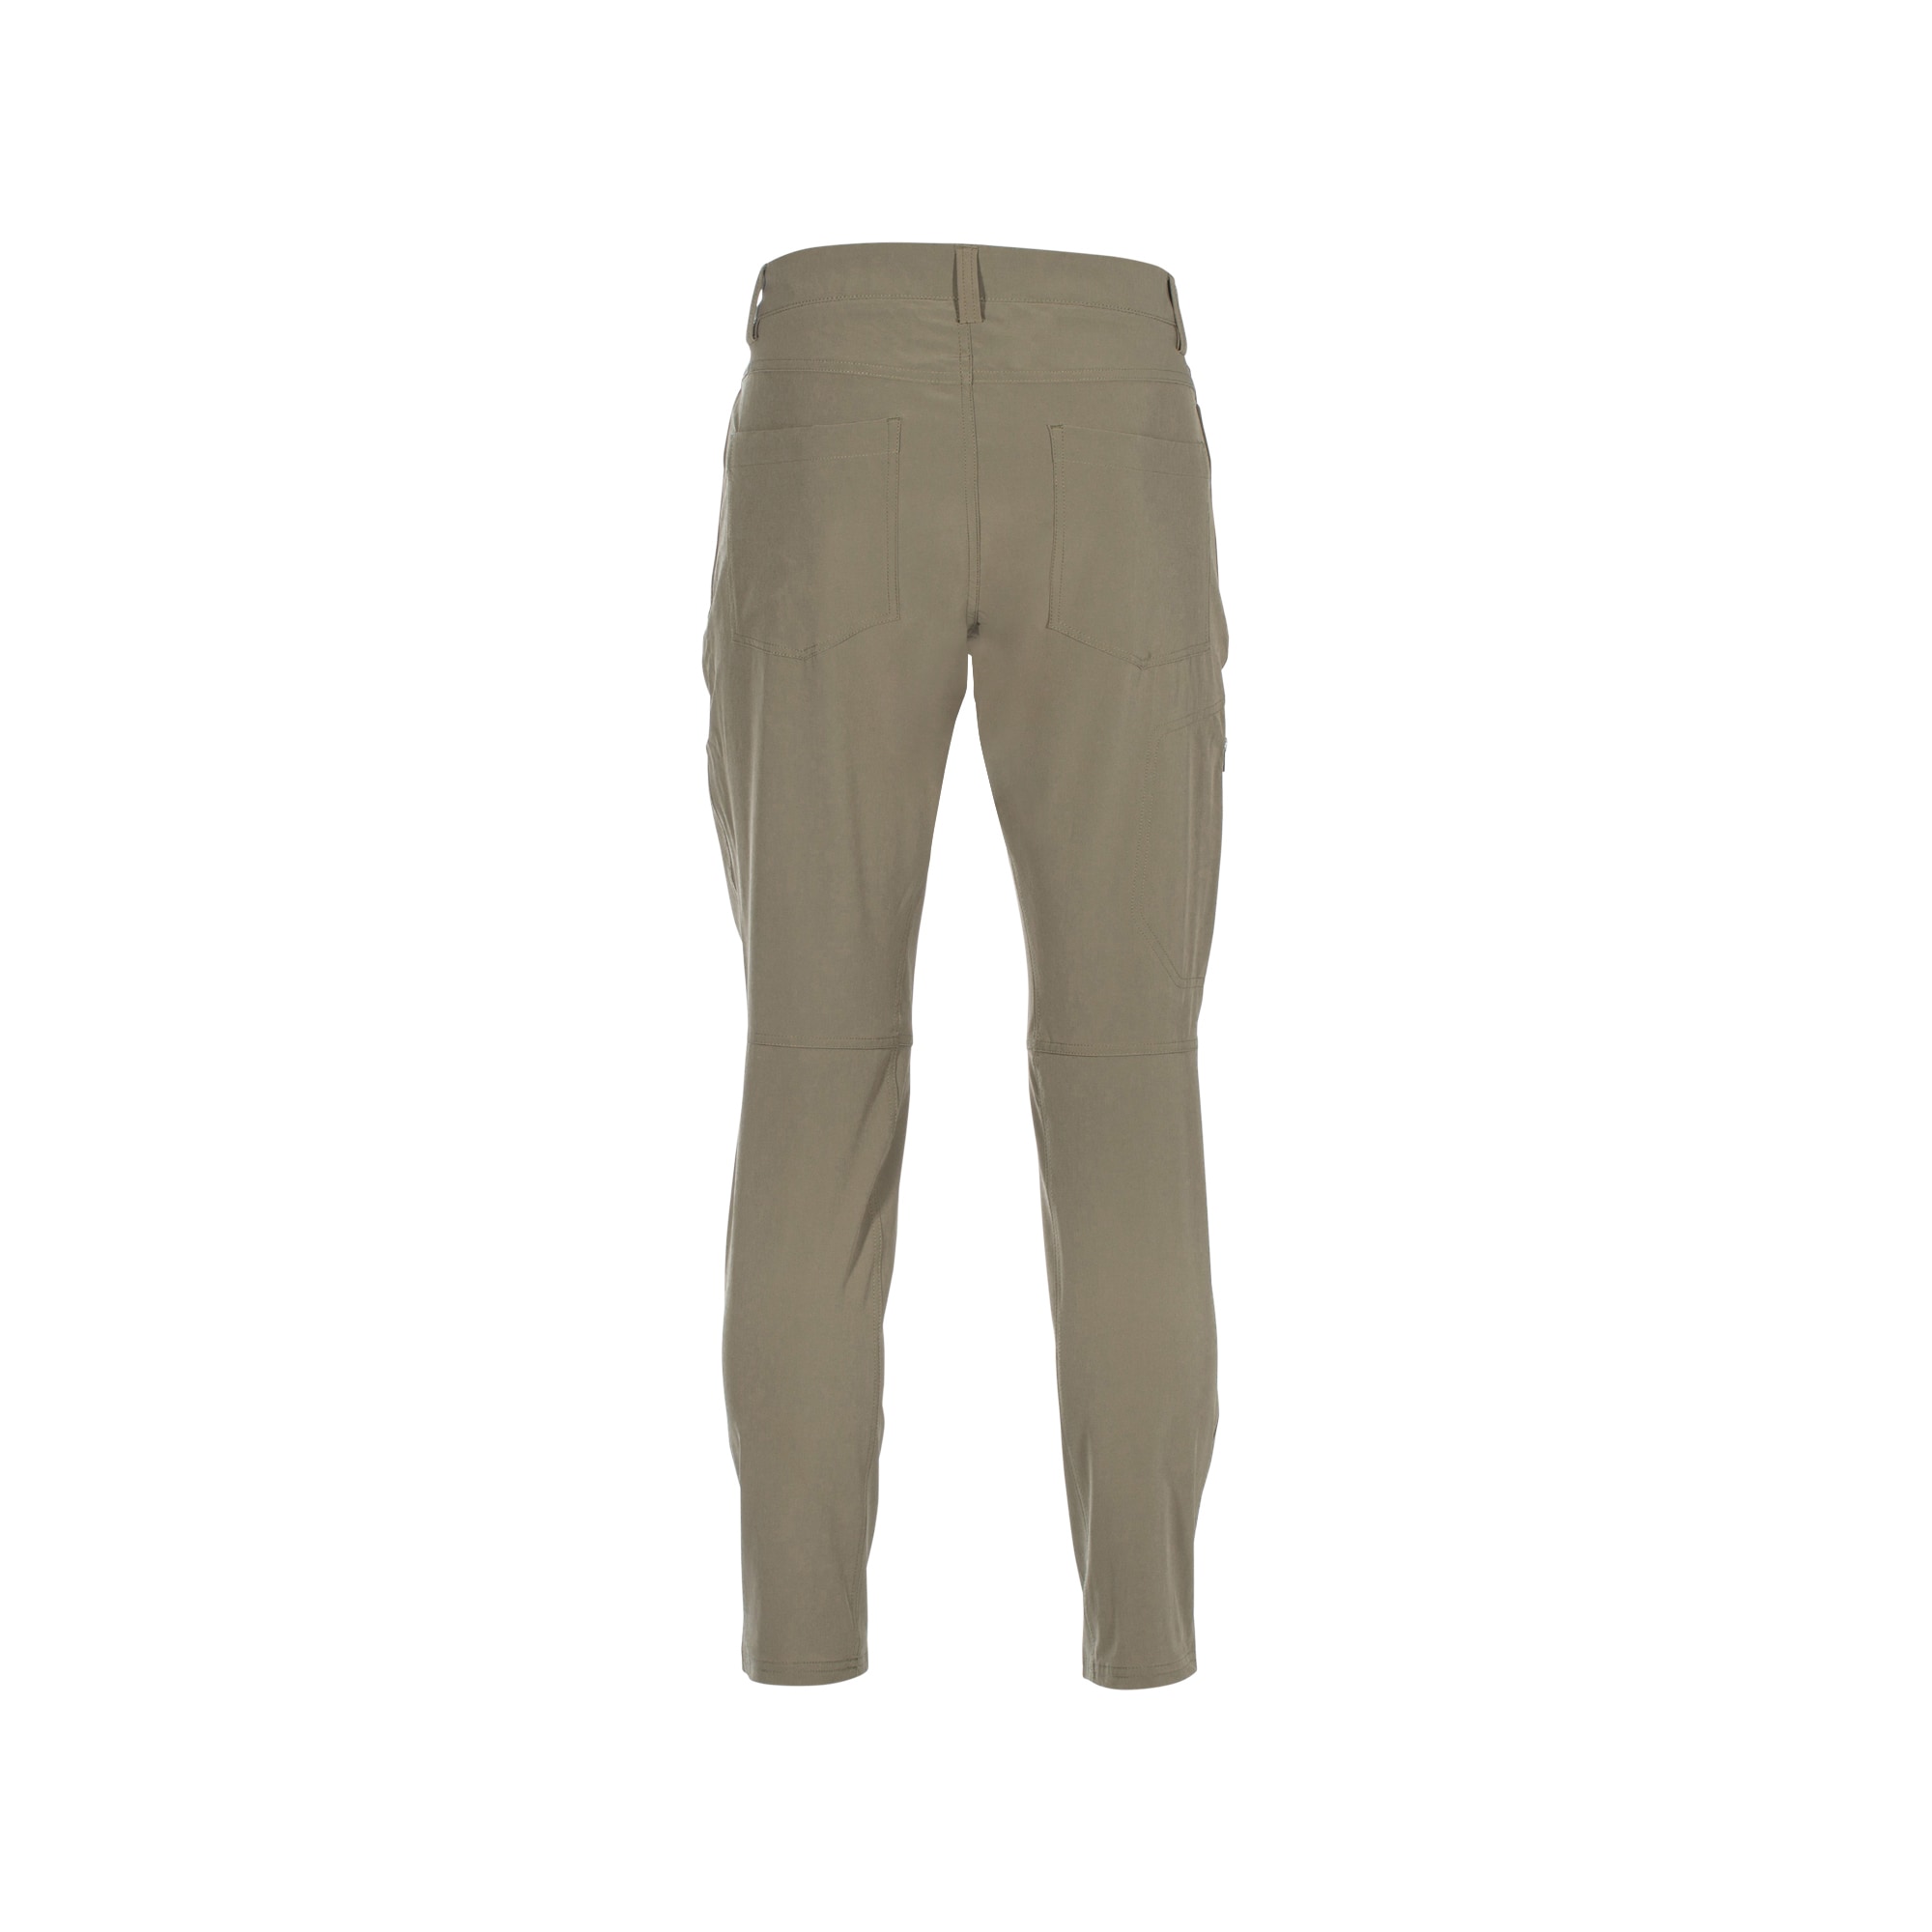 Purchase the Under Armour Flex Pant bayou by ASMC